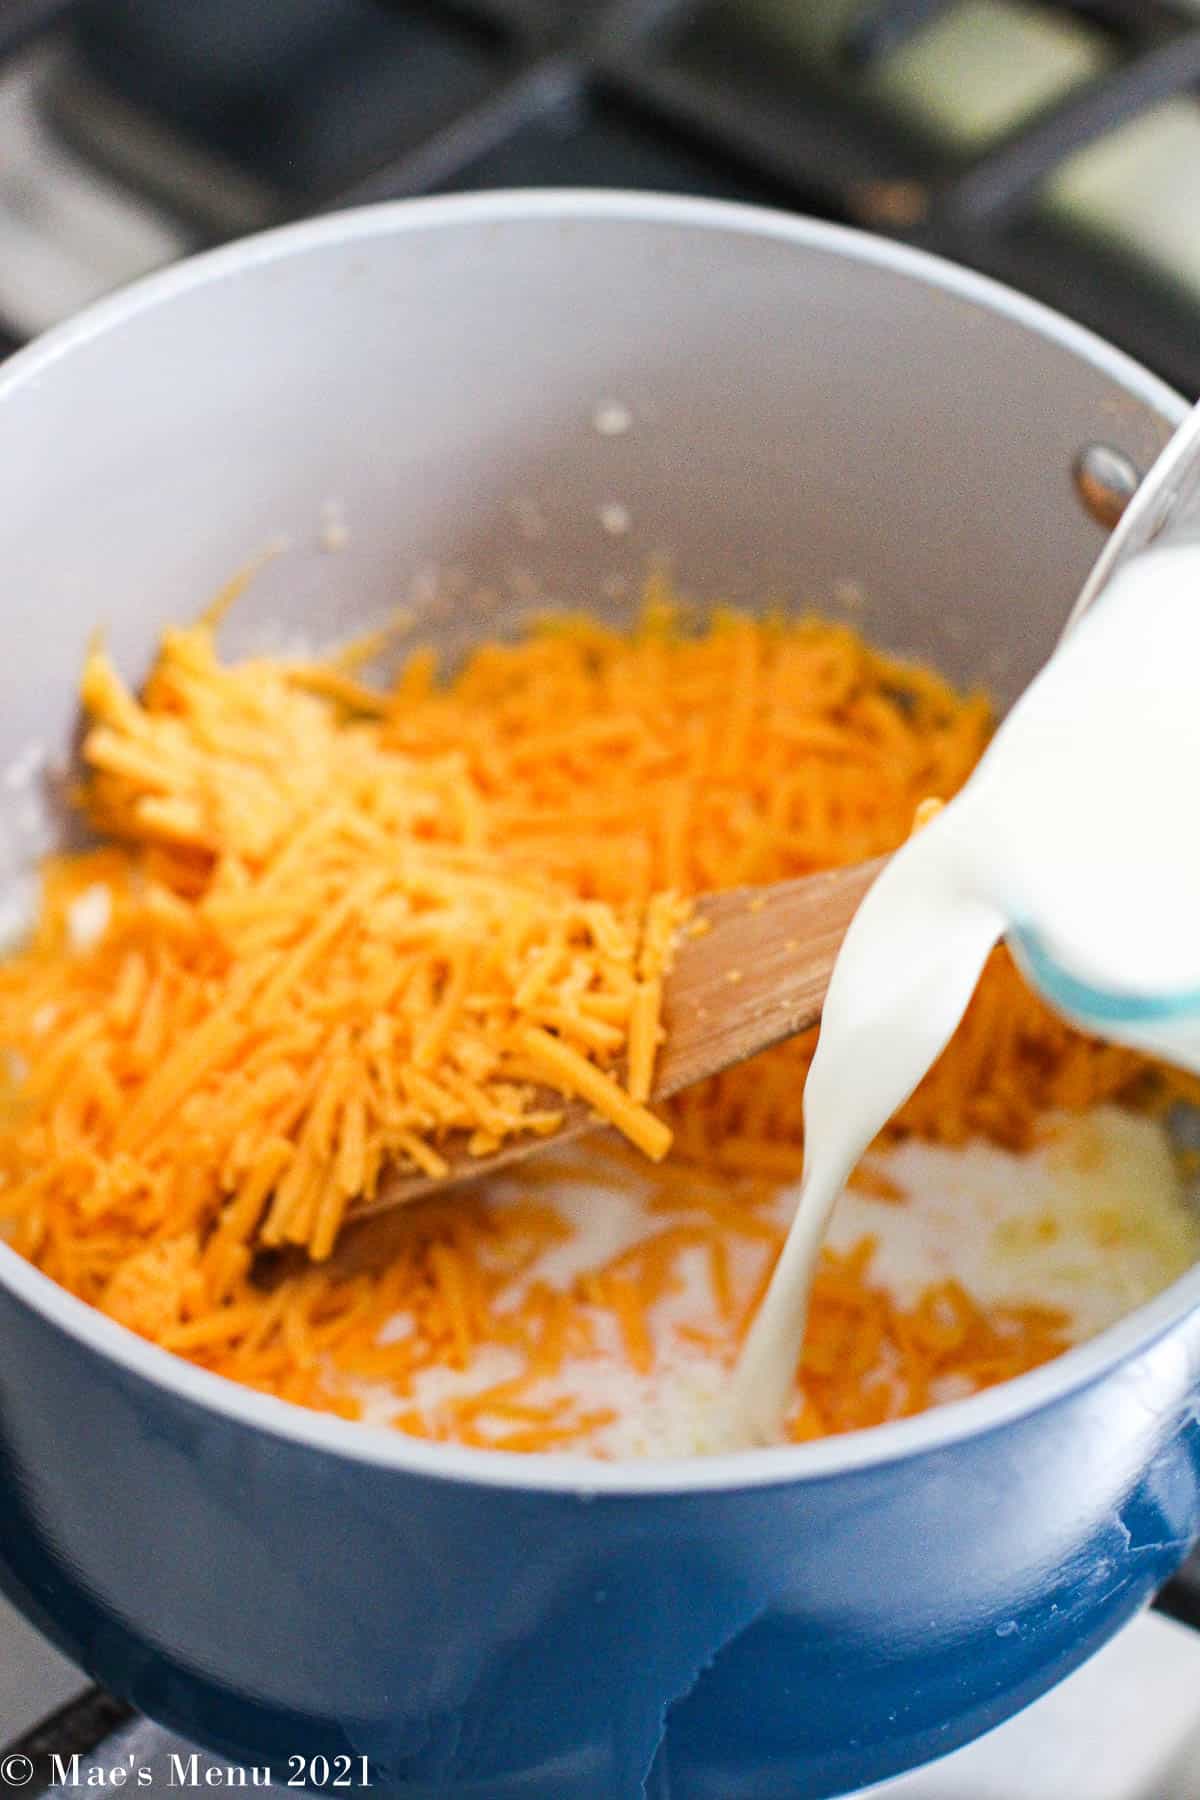 Shredded sharp cheddar cheese, and butter with milk pouring into the pan